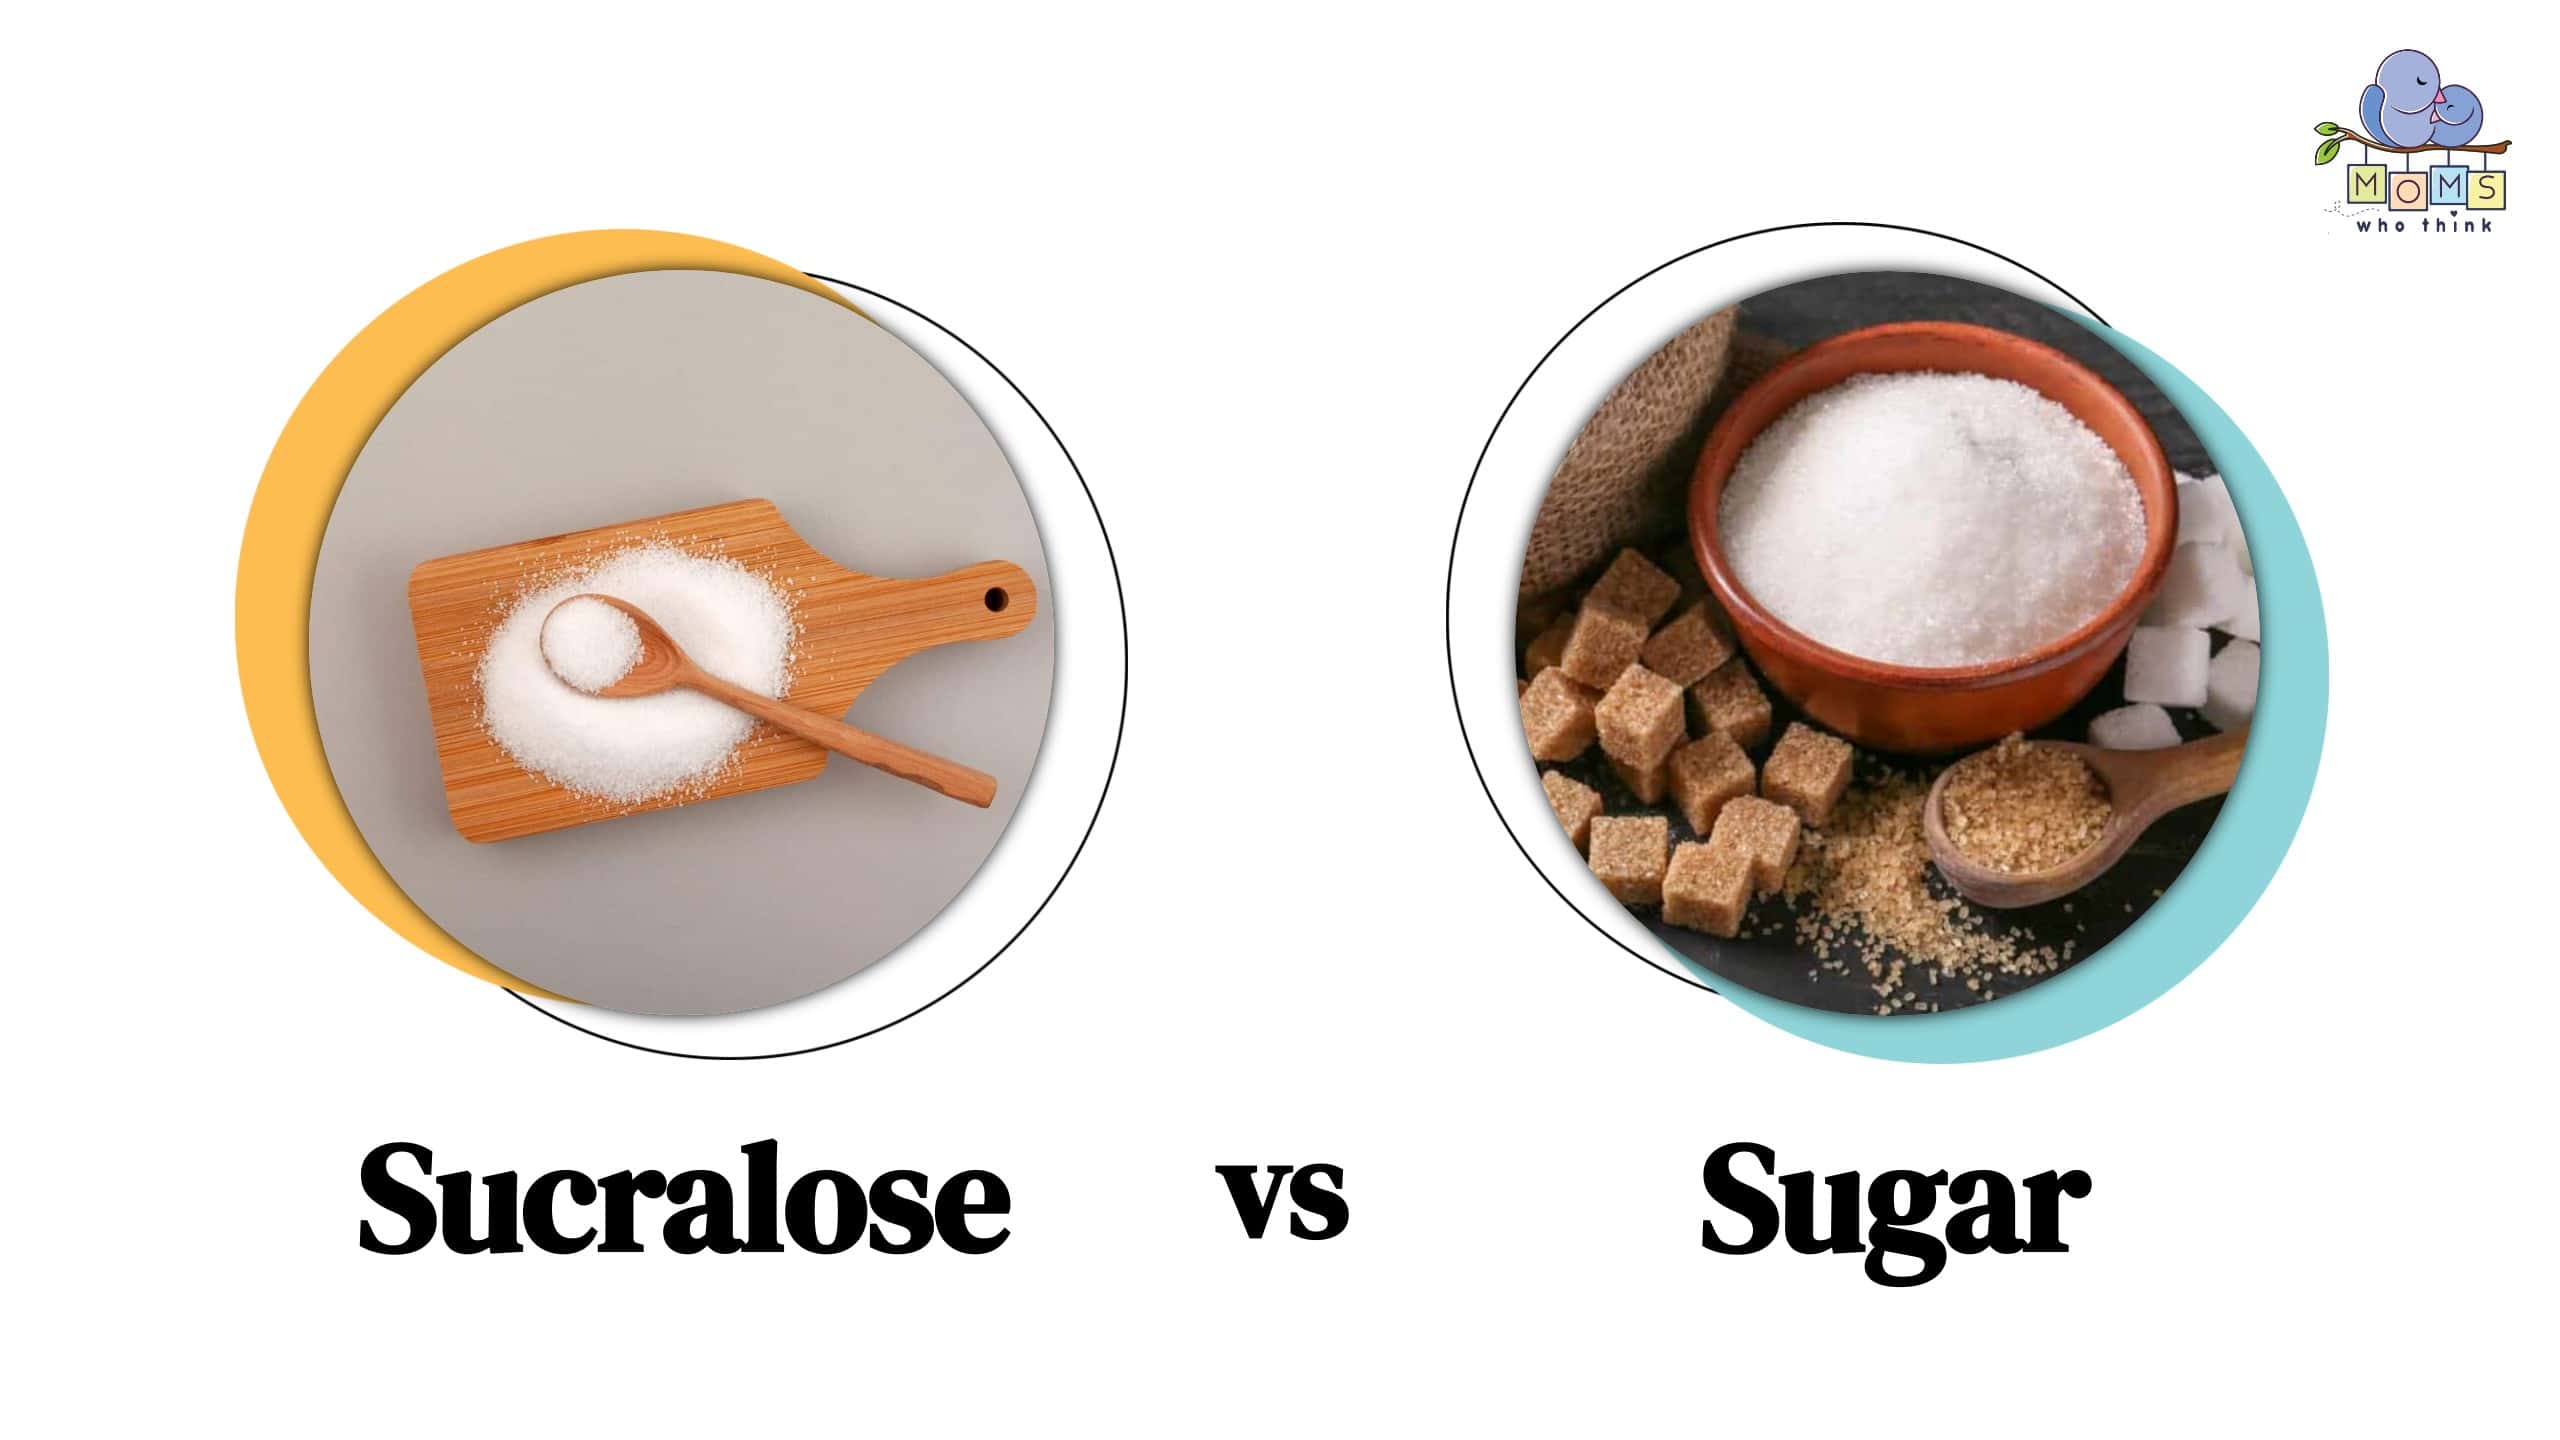 Is Sucralose Bad for You? - What Is Sucralose?